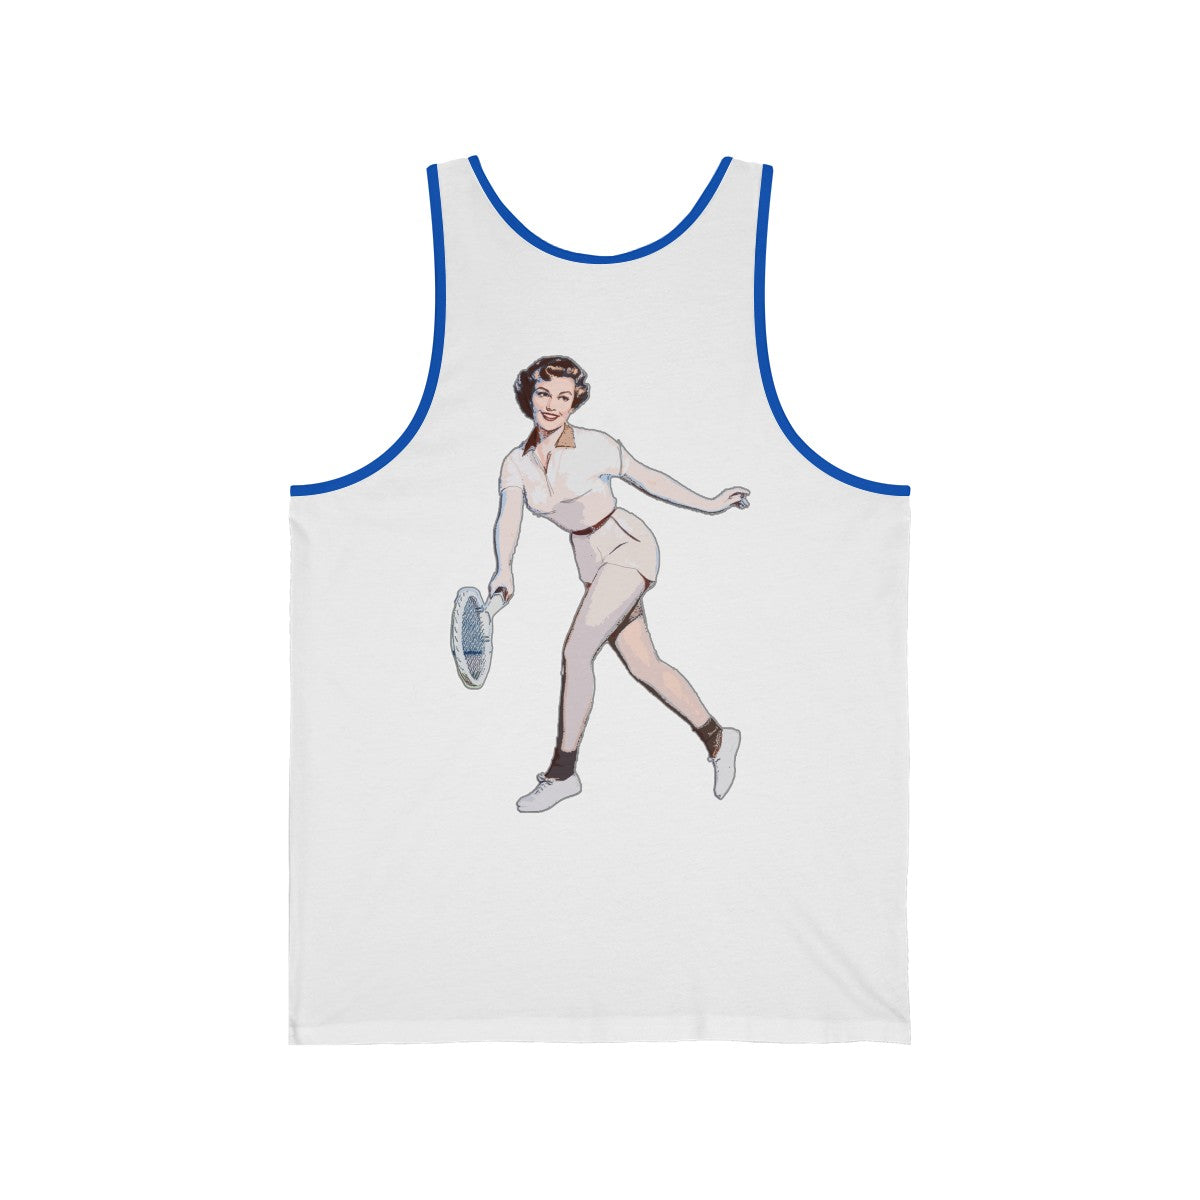 Love Is For Losers Funny Tennis Score Tank Top With Vintage Female Tennis Player